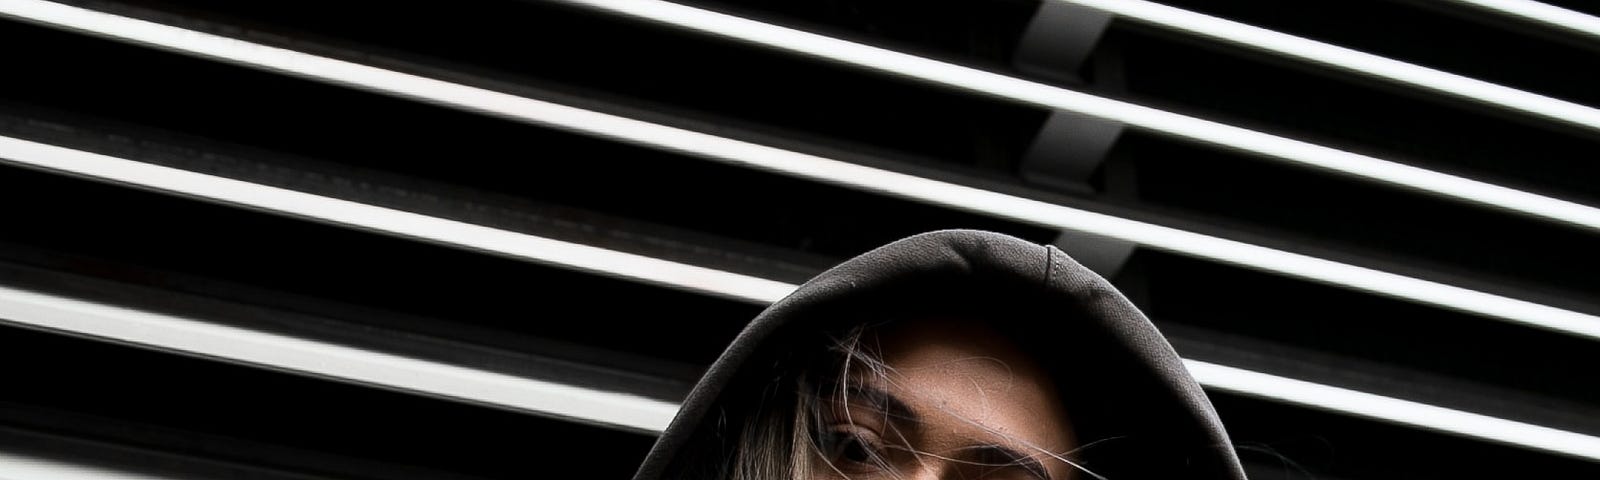 A woman in a hoodie standing in the lower section of Venetian blind window.